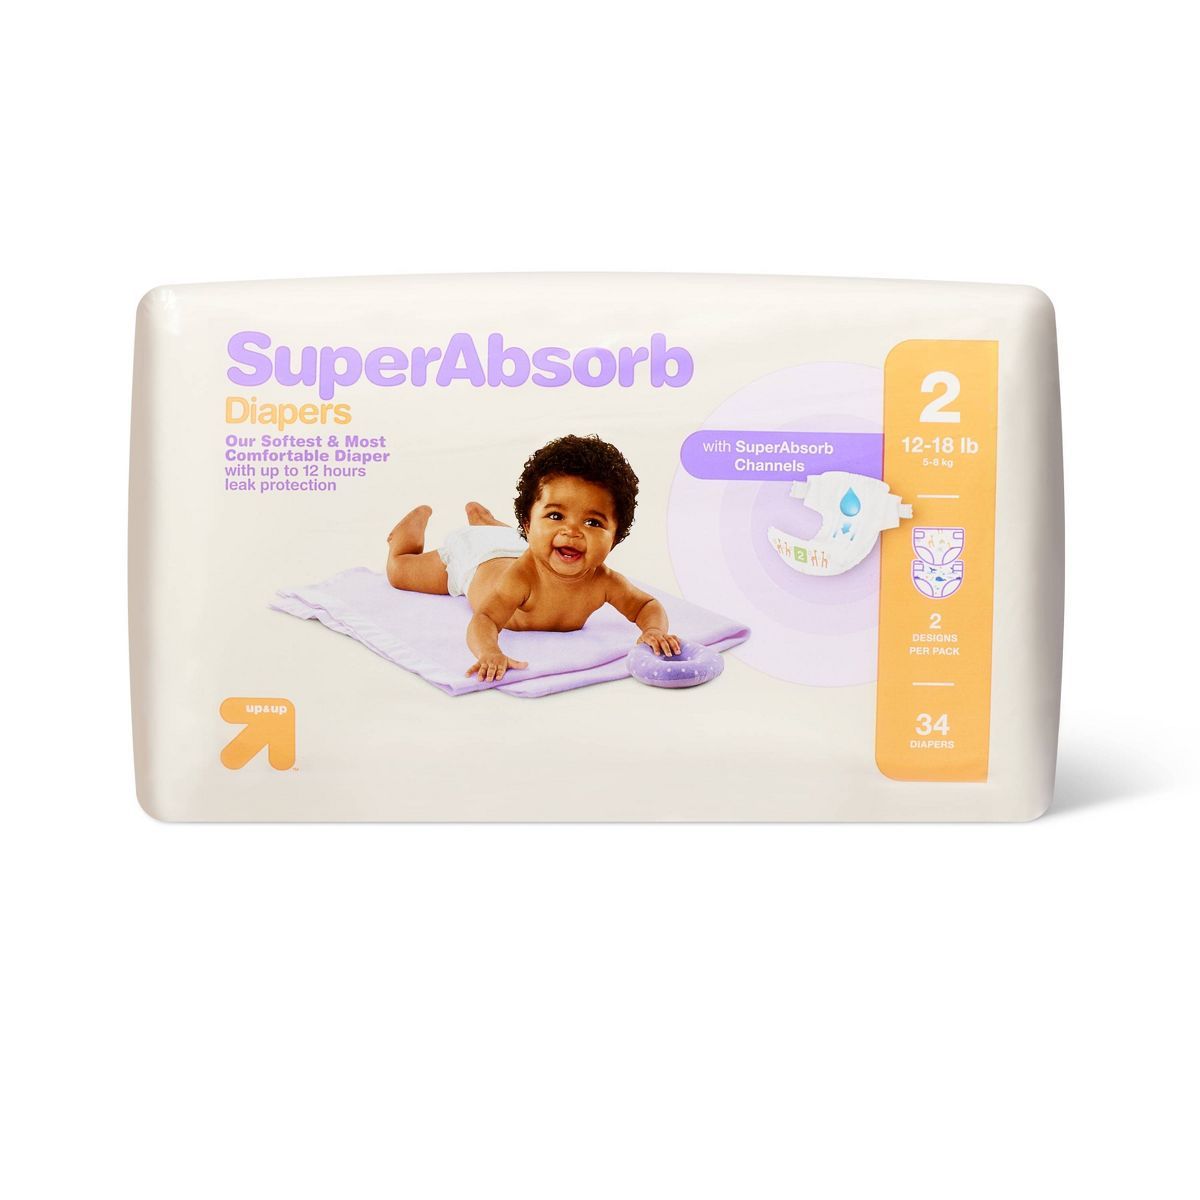 Disposable Diapers Pack - up & up™ | Target